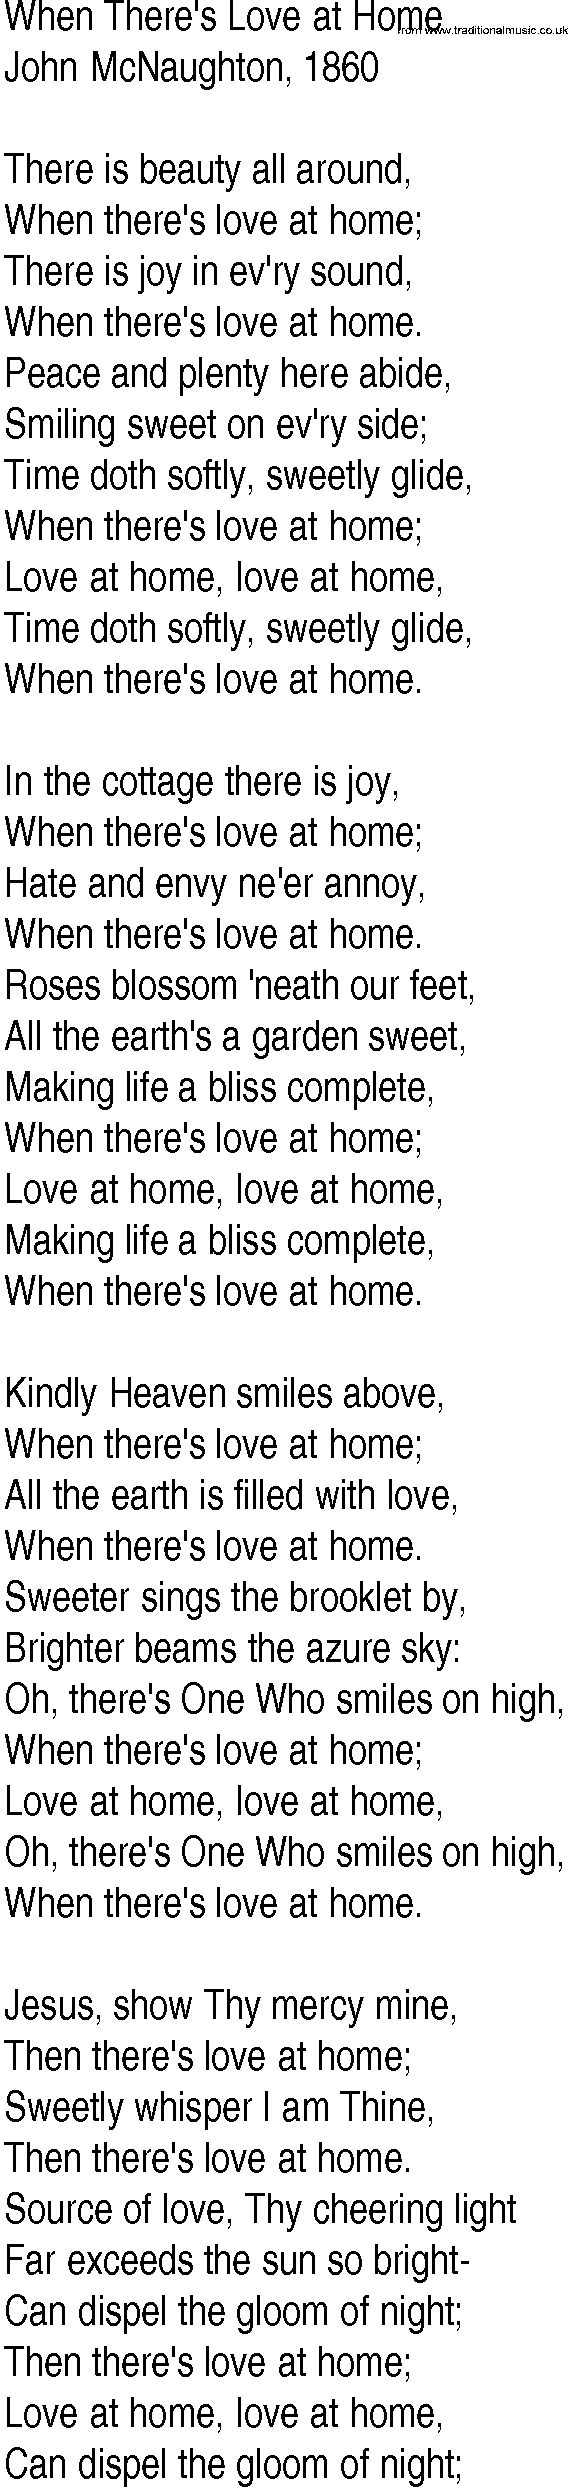 Hymn and Gospel Song: When There's Love at Home by John McNaughton lyrics